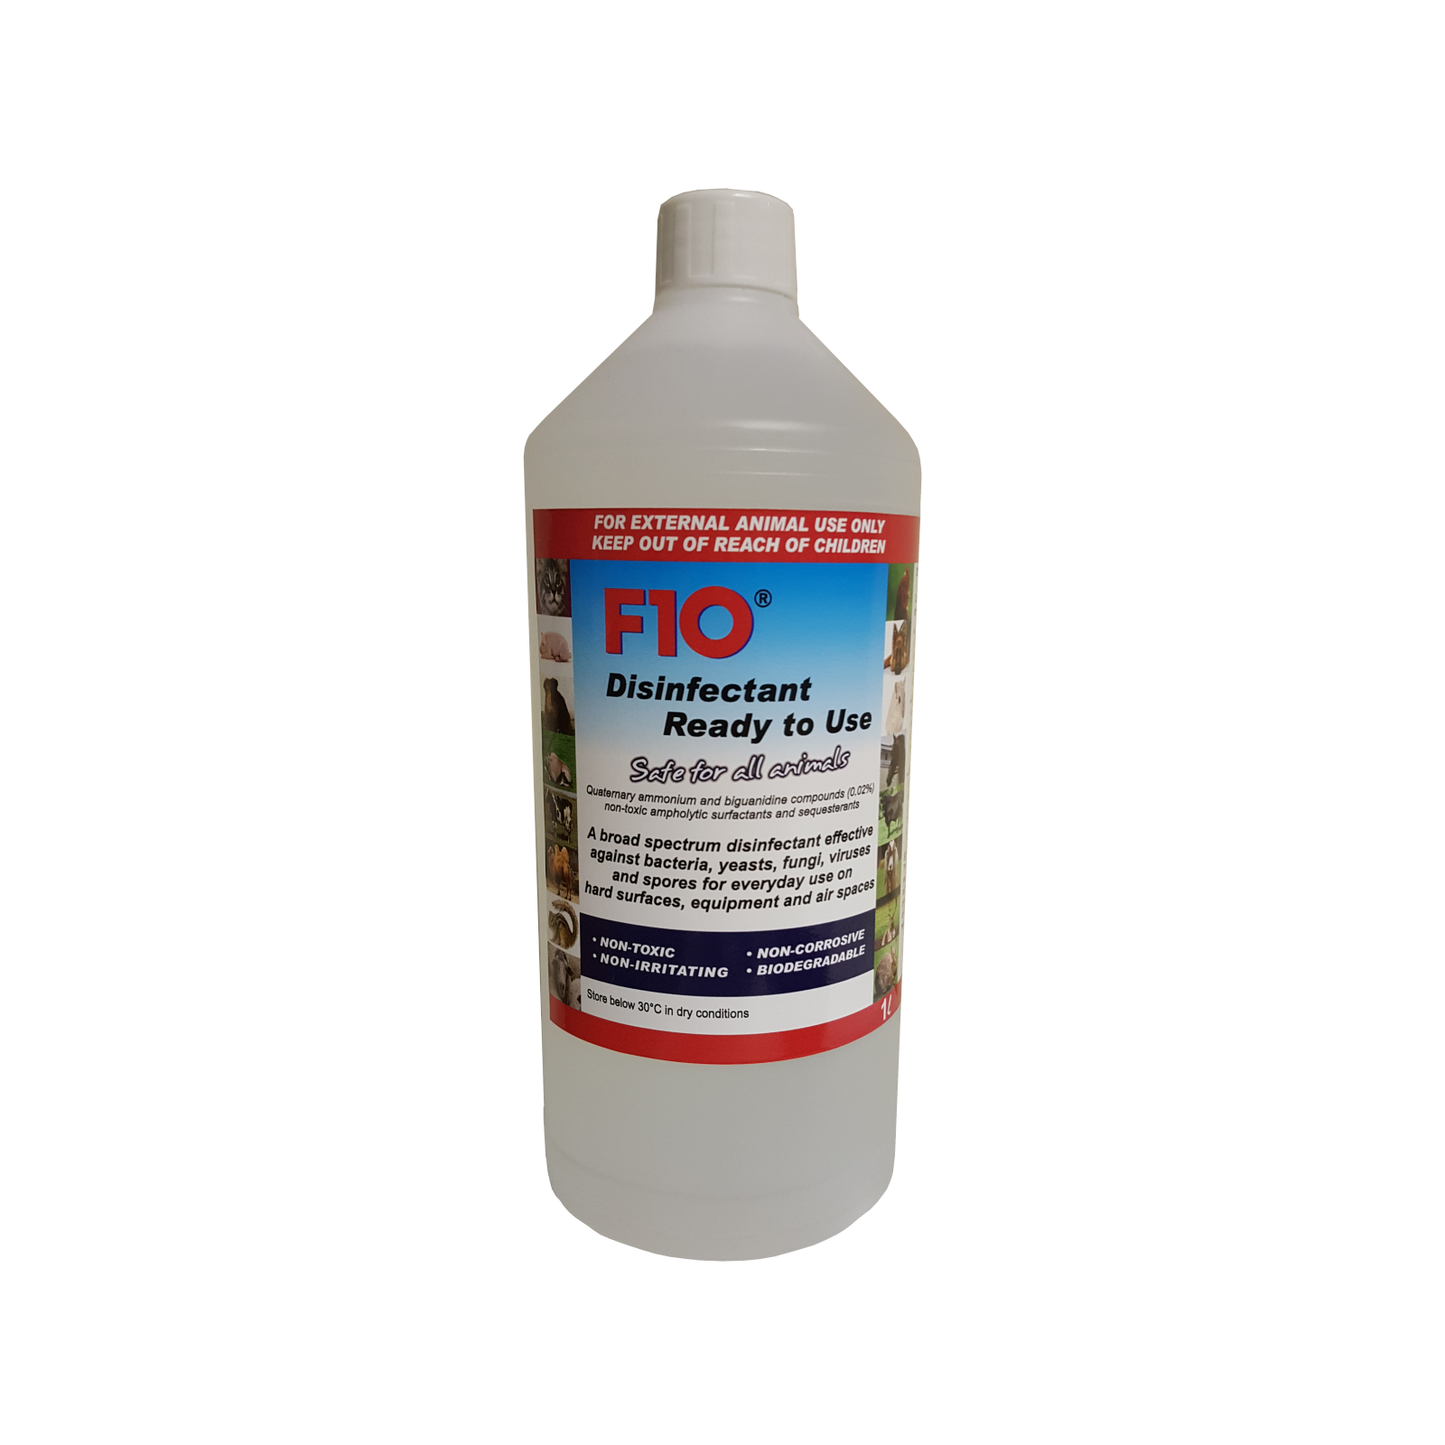 A 1 litre bottle of F10 Disinfectant Ready to Use